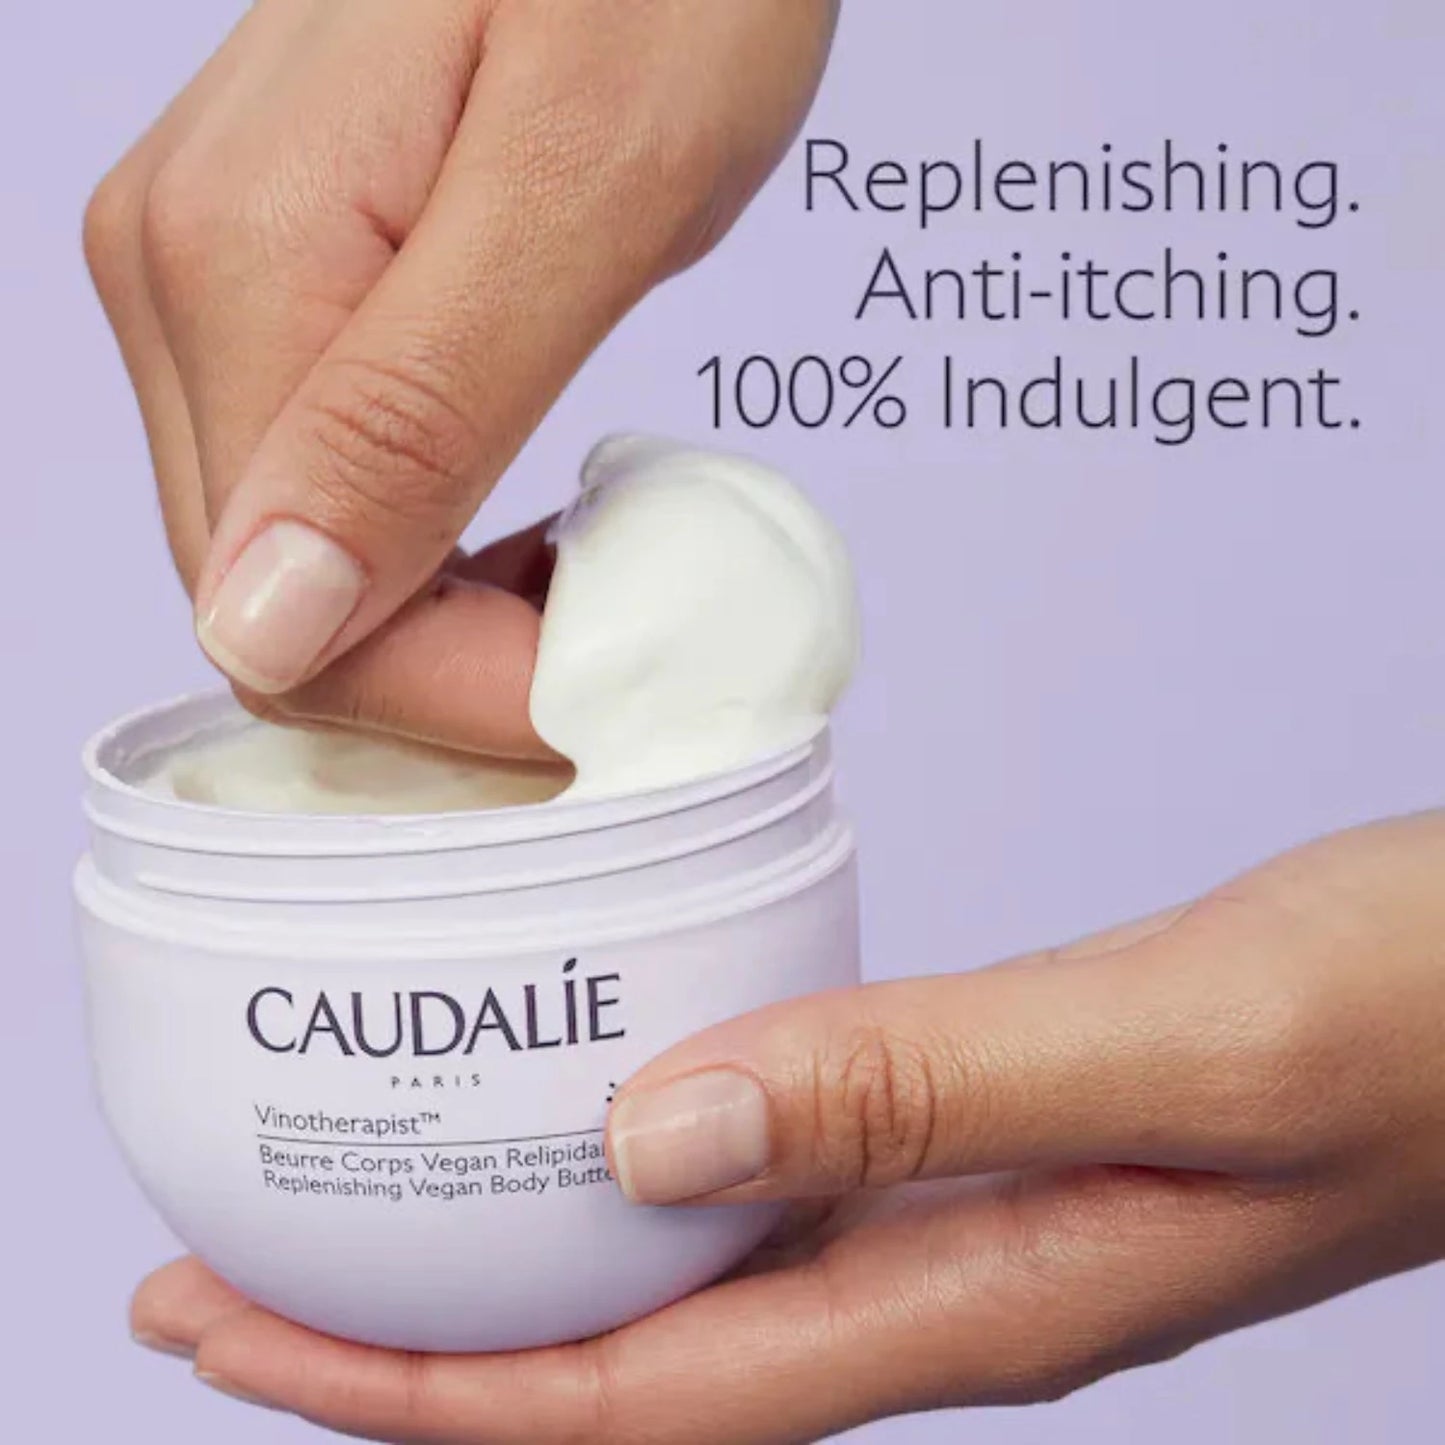 Caudalie Vinotherapist Vegan Body Butter is dermatologically tested, the product also has a 100% natural-origin fragrance and has visible results, providing up to 90% soothing and 95% anti-itching effects. 